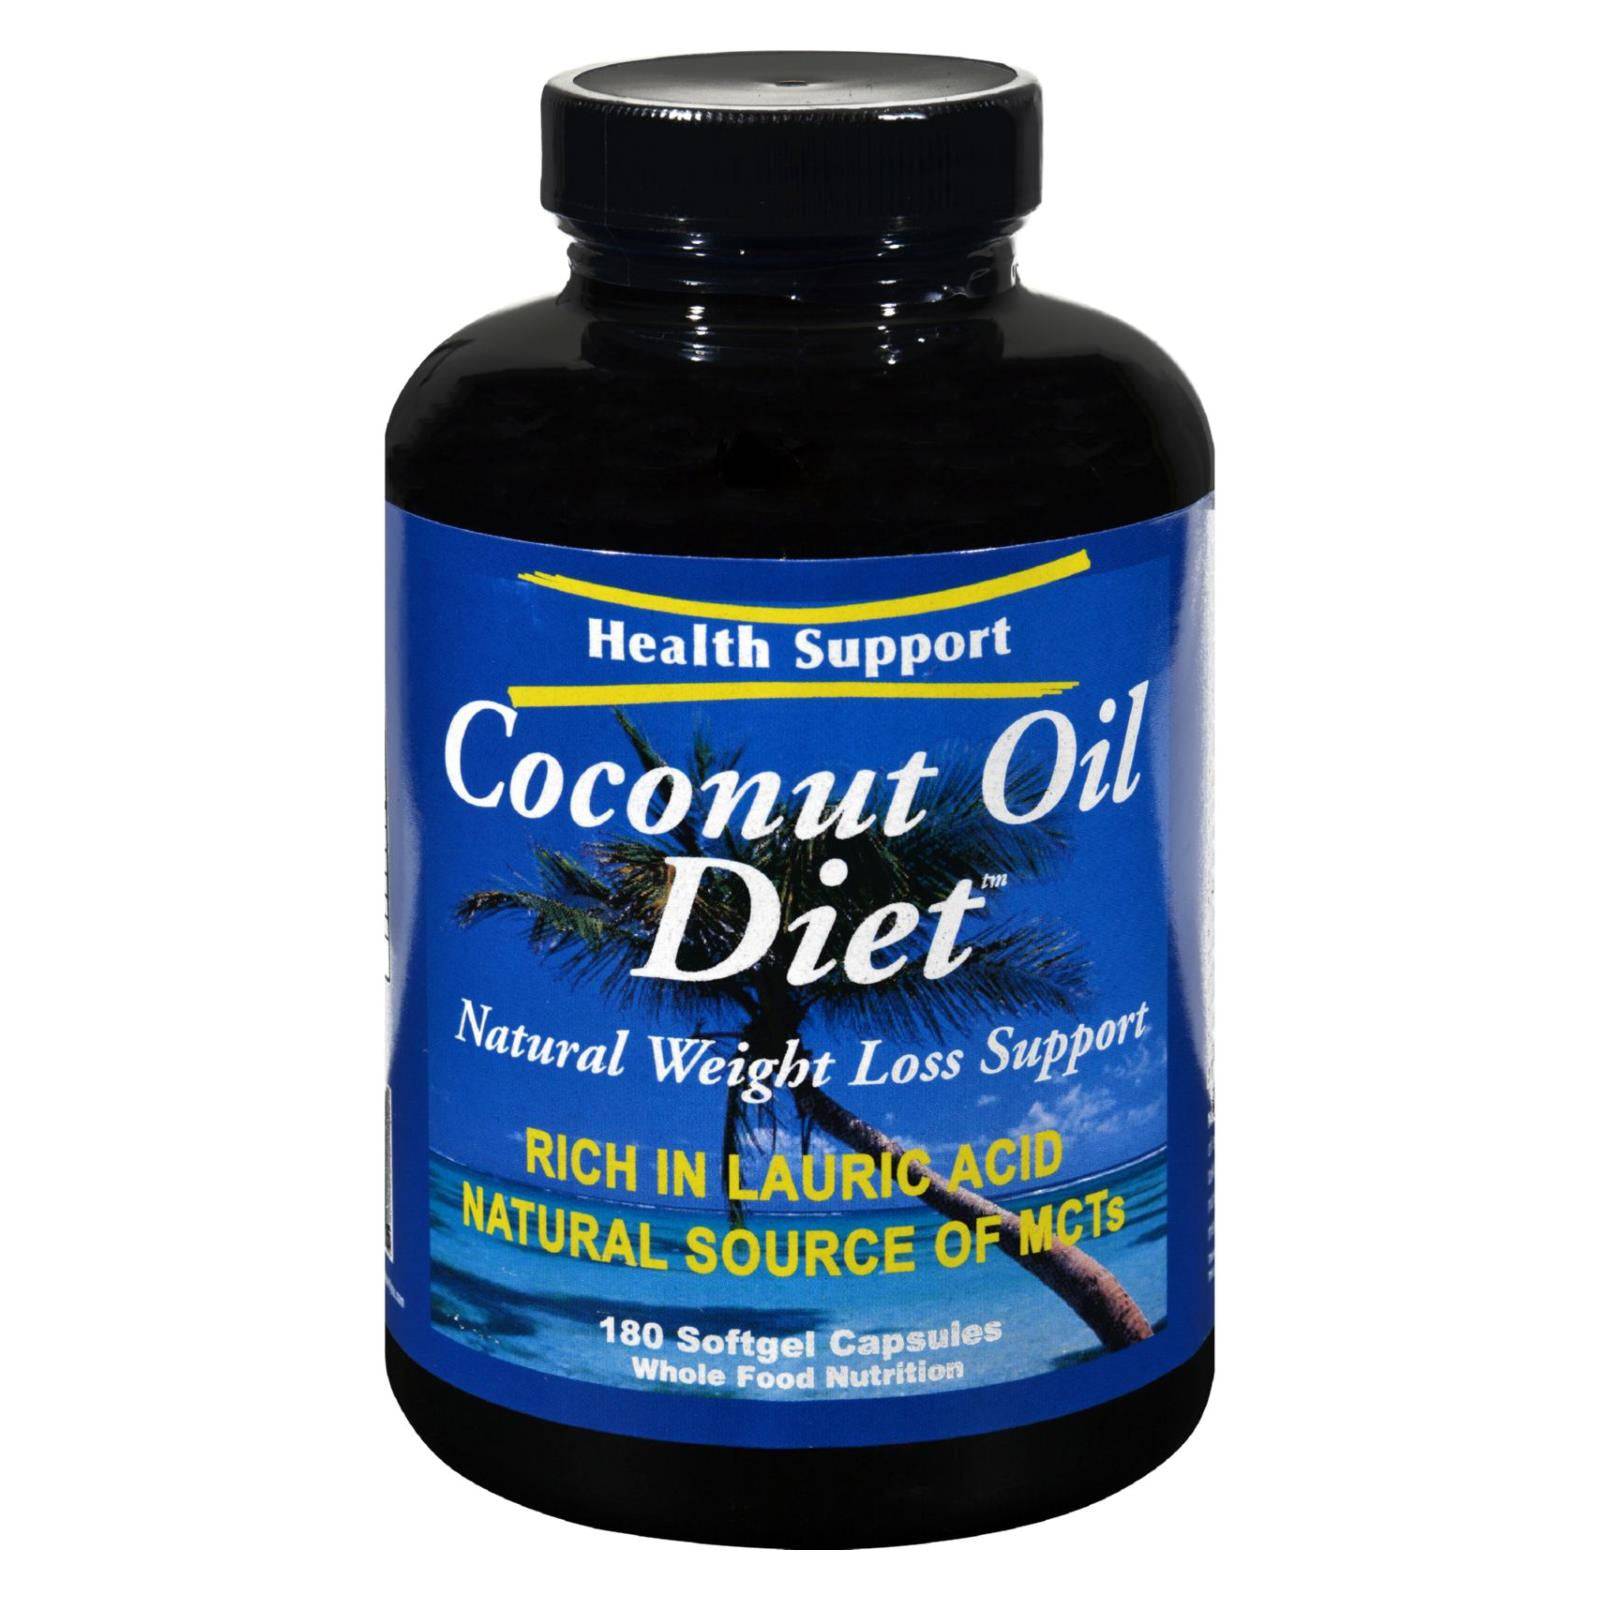 Buy Health Support Coconut Oil Diet - 180 Softgel Capsules  at OnlyNaturals.us